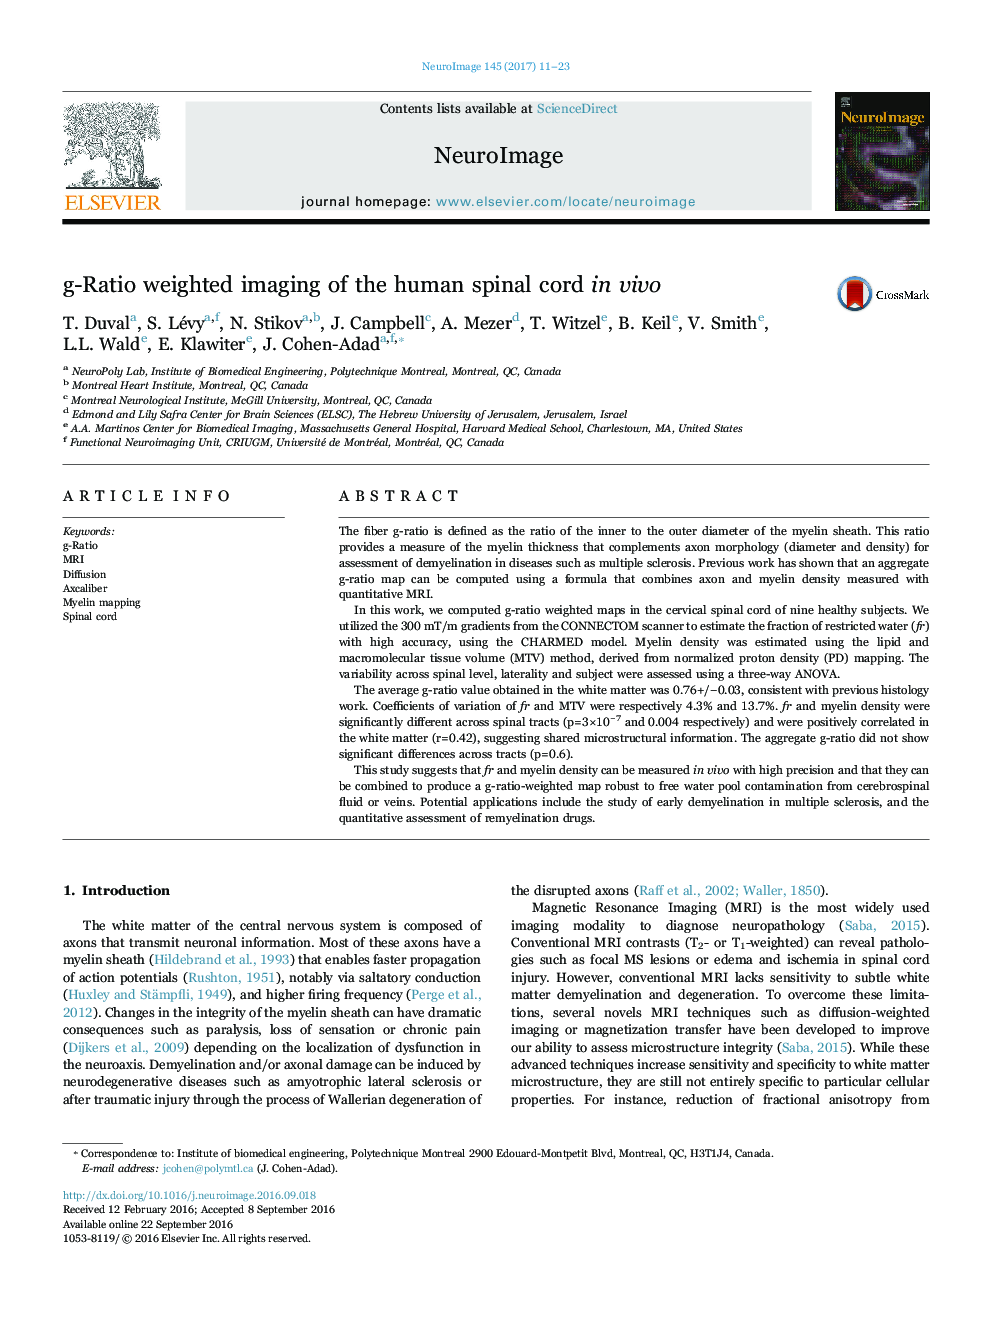 g-Ratio weighted imaging of the human spinal cord in vivo